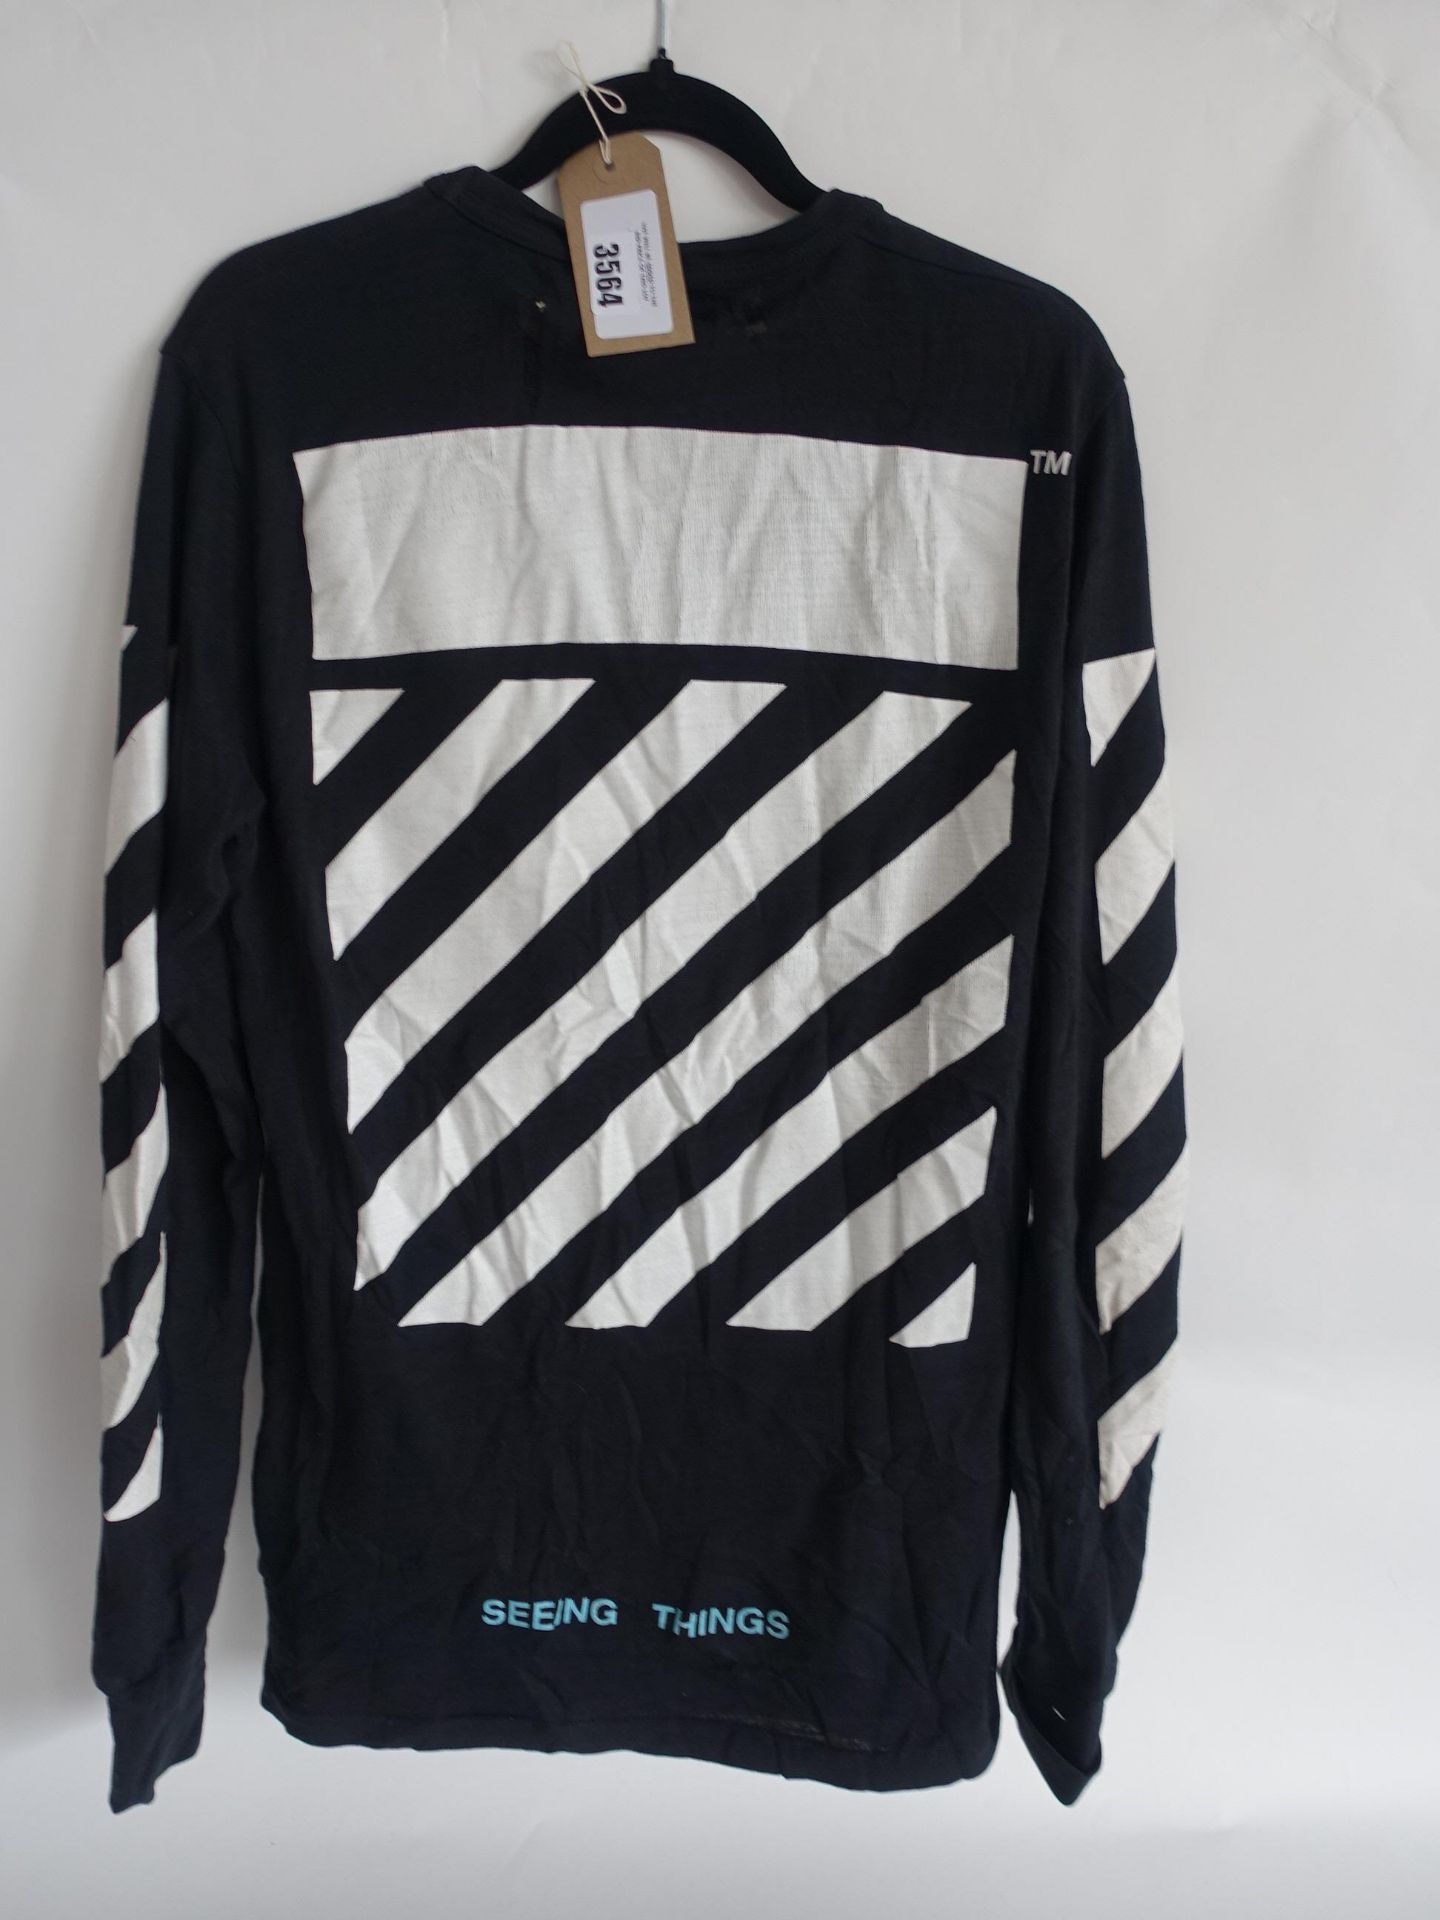 Off-White ''Seeing Things'' black long-sleeve t-shirt size xsmall (used af)